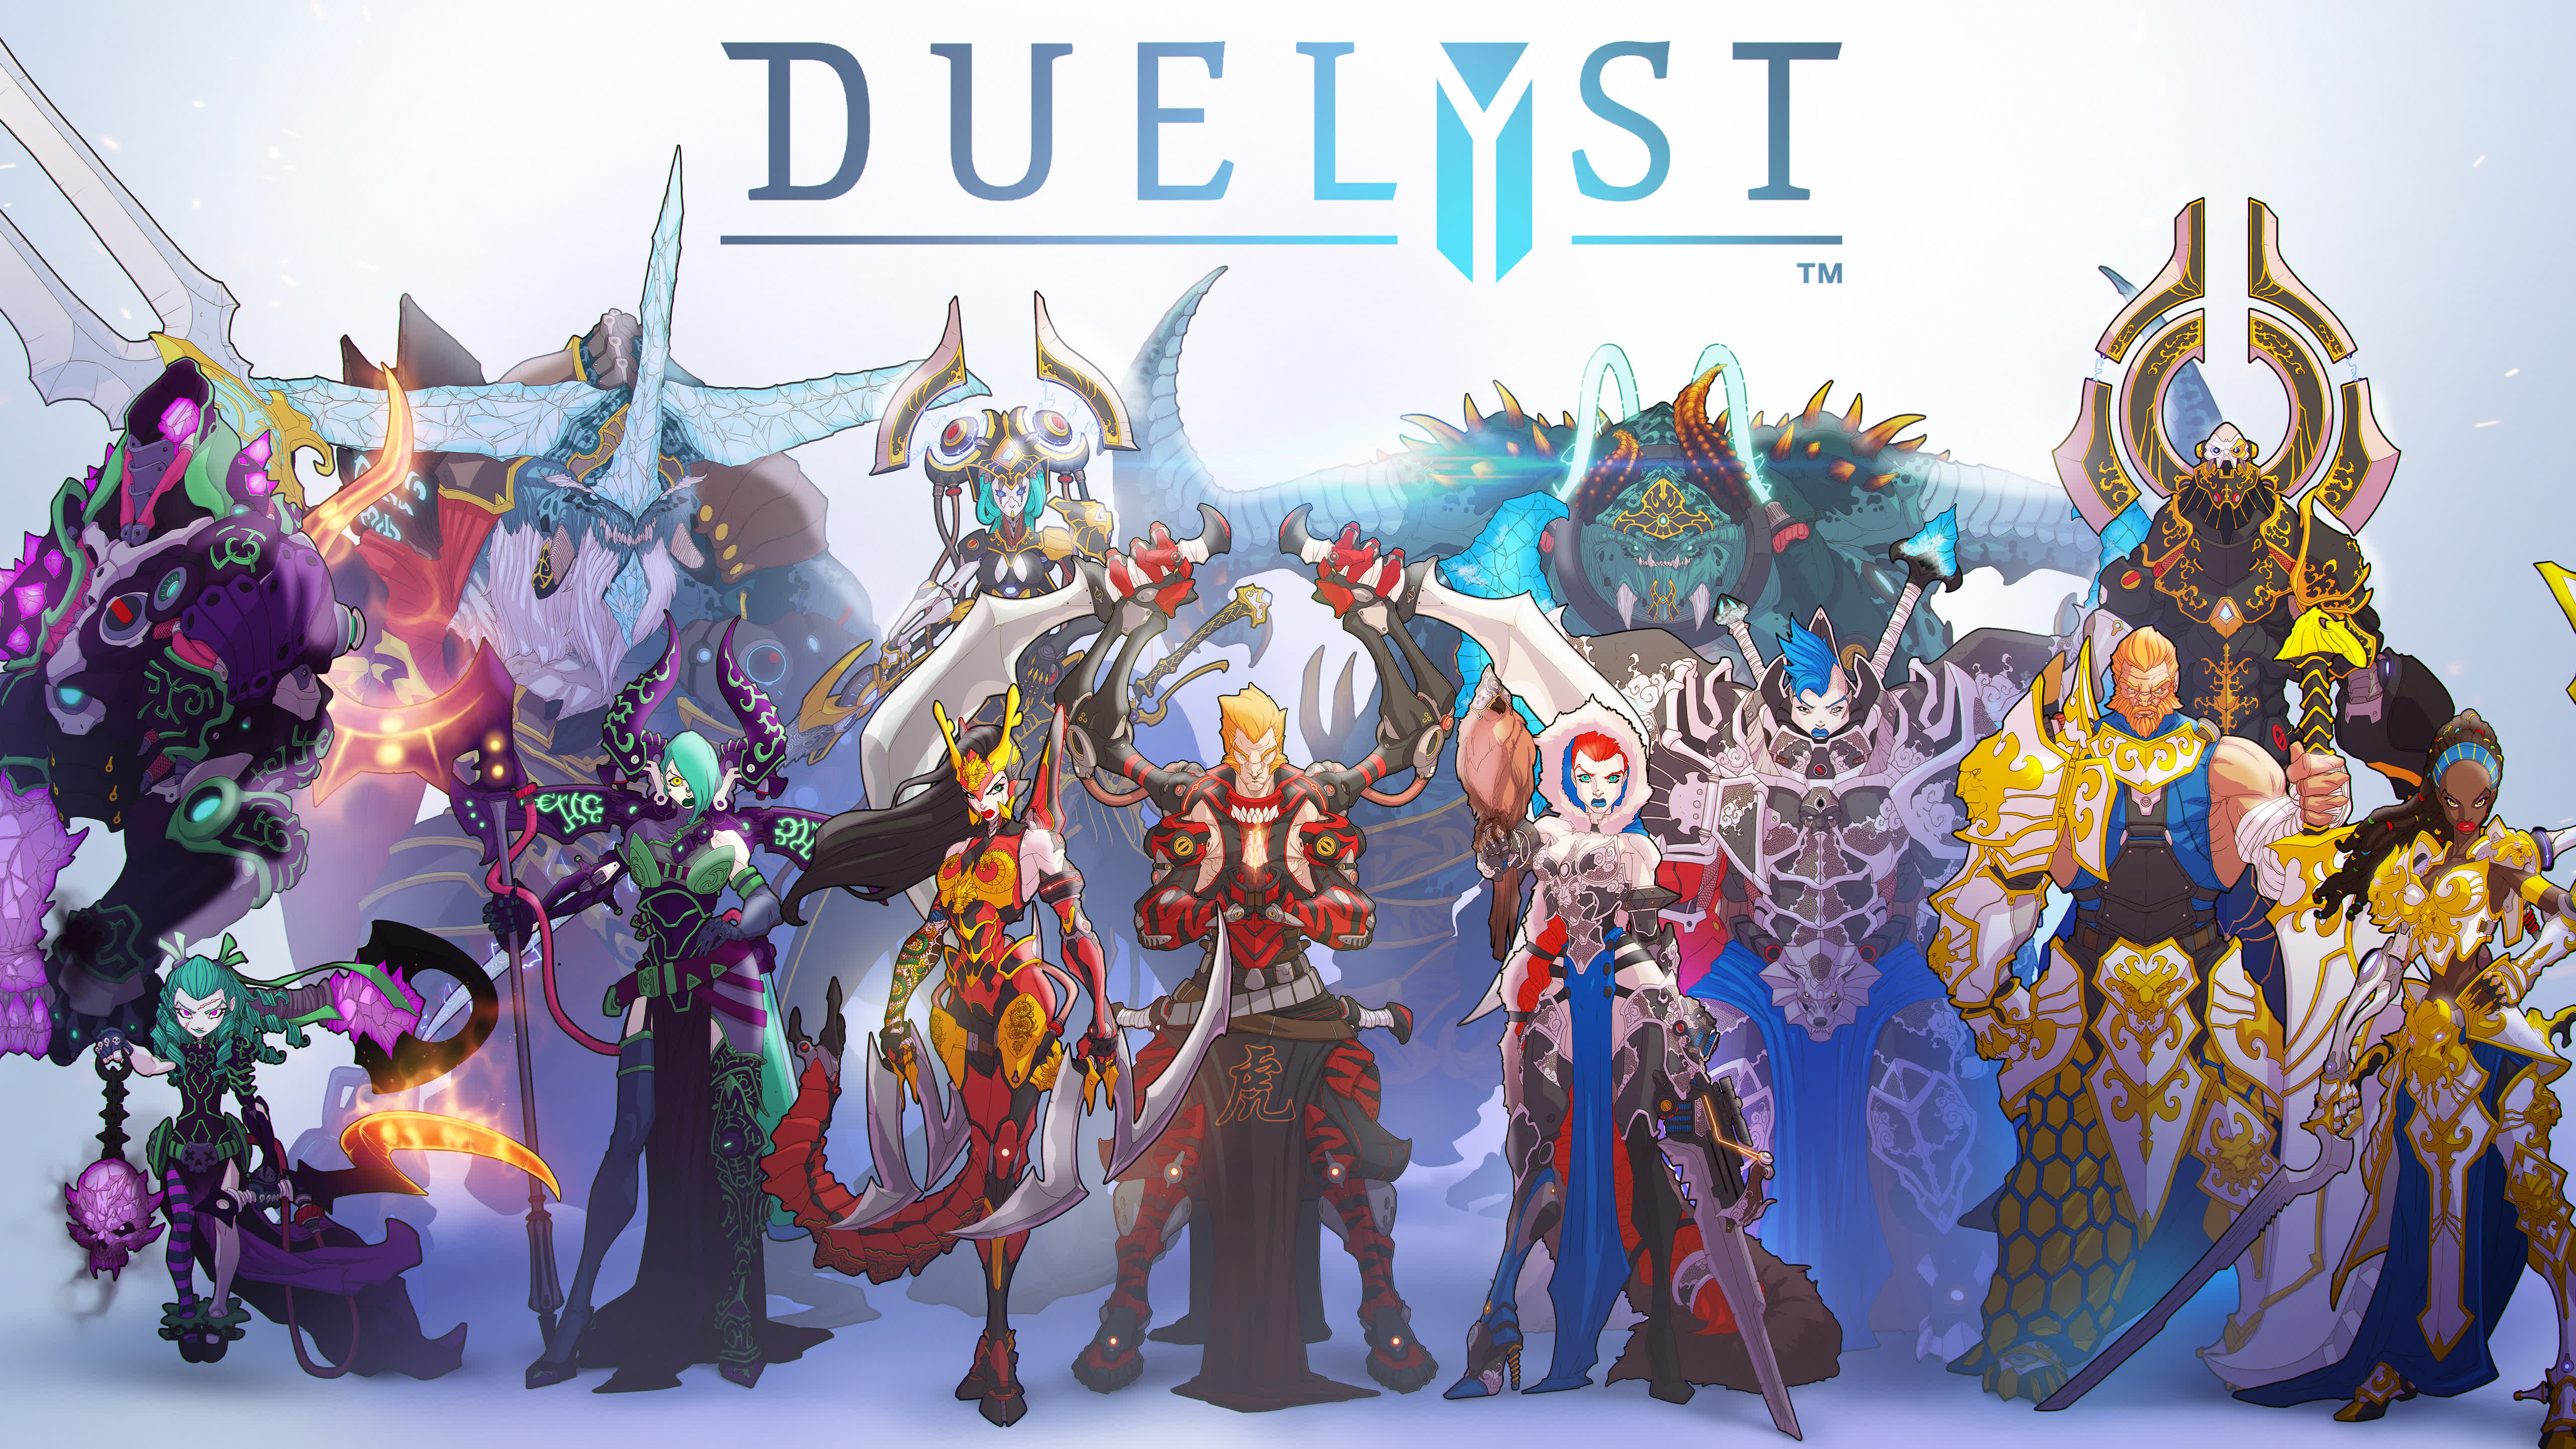 5120x2880 > Duelyst Wallpapers